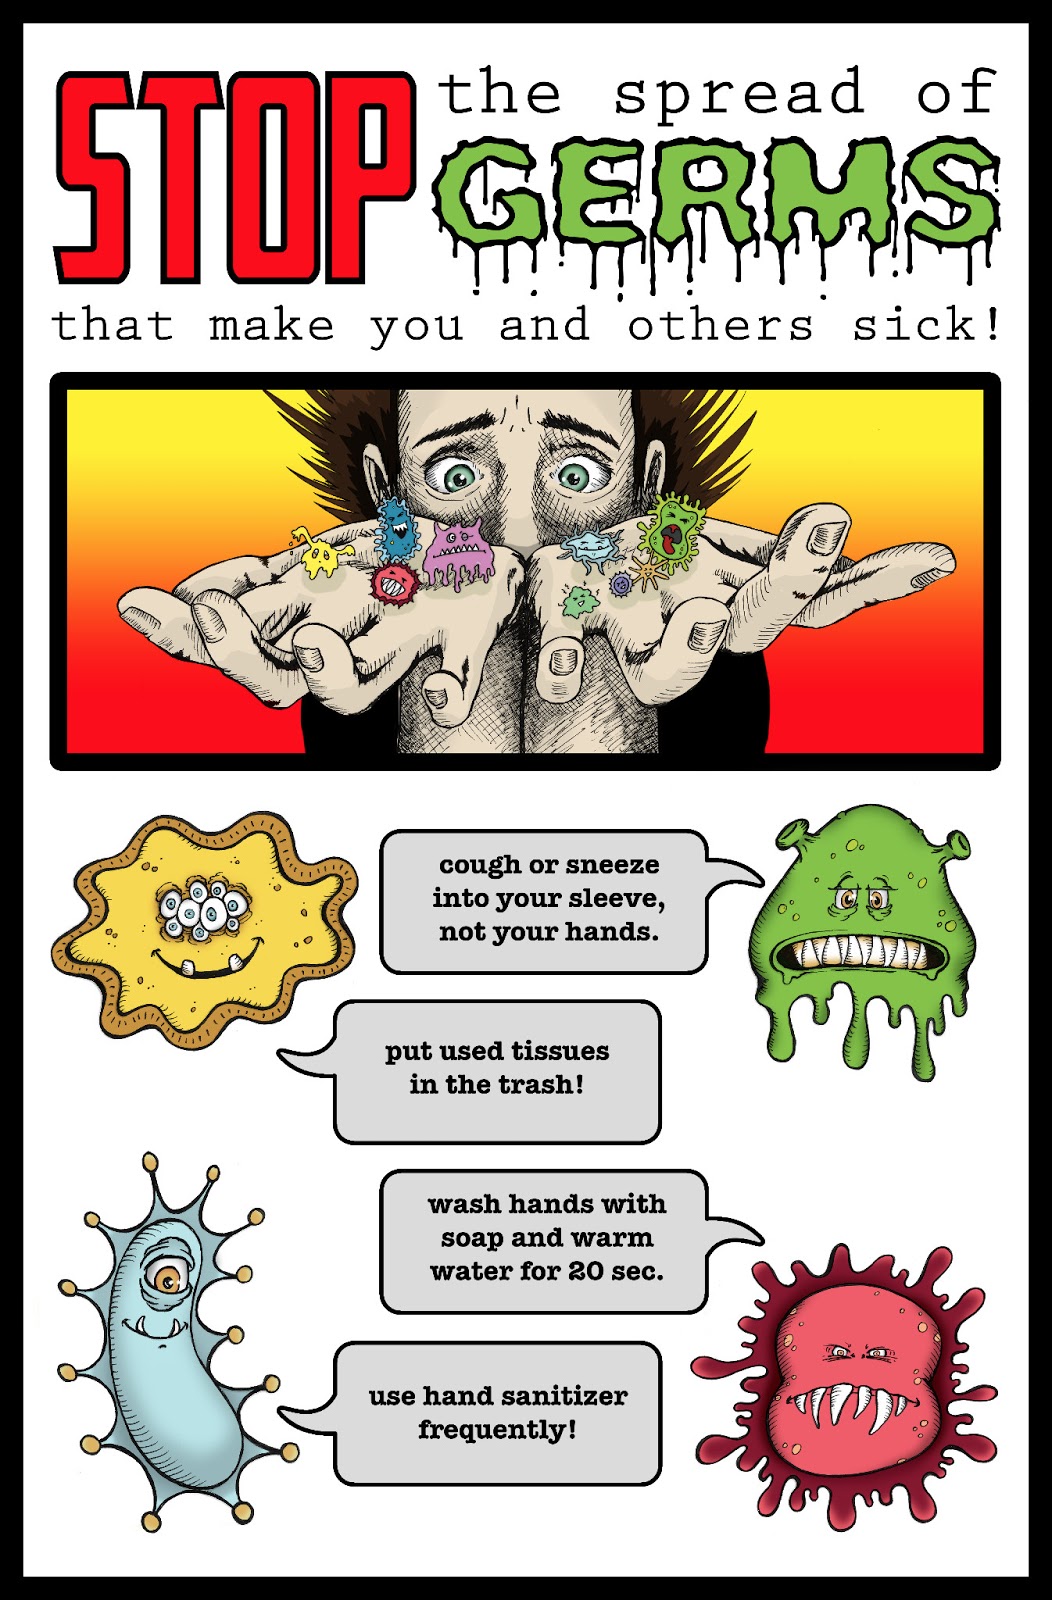 Face the consequences of Germs. Discovery of Germs was made in. Halt the spread of STH. Germs перевод